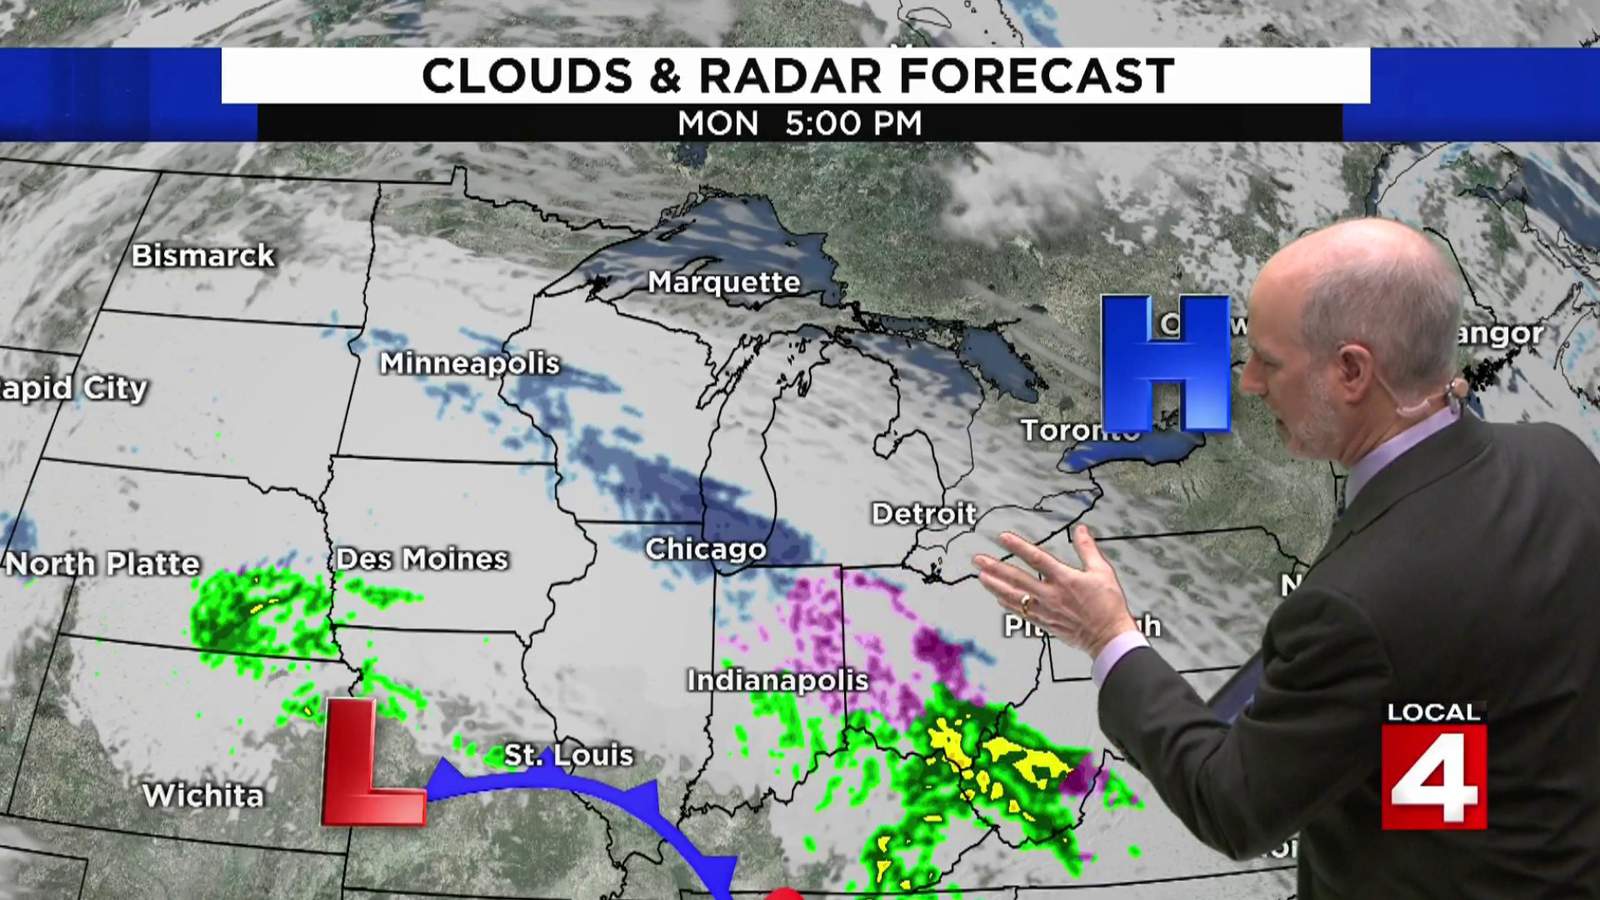 Metro Detroit weather: Sunny Sunday afternoon with some breeze kicking in